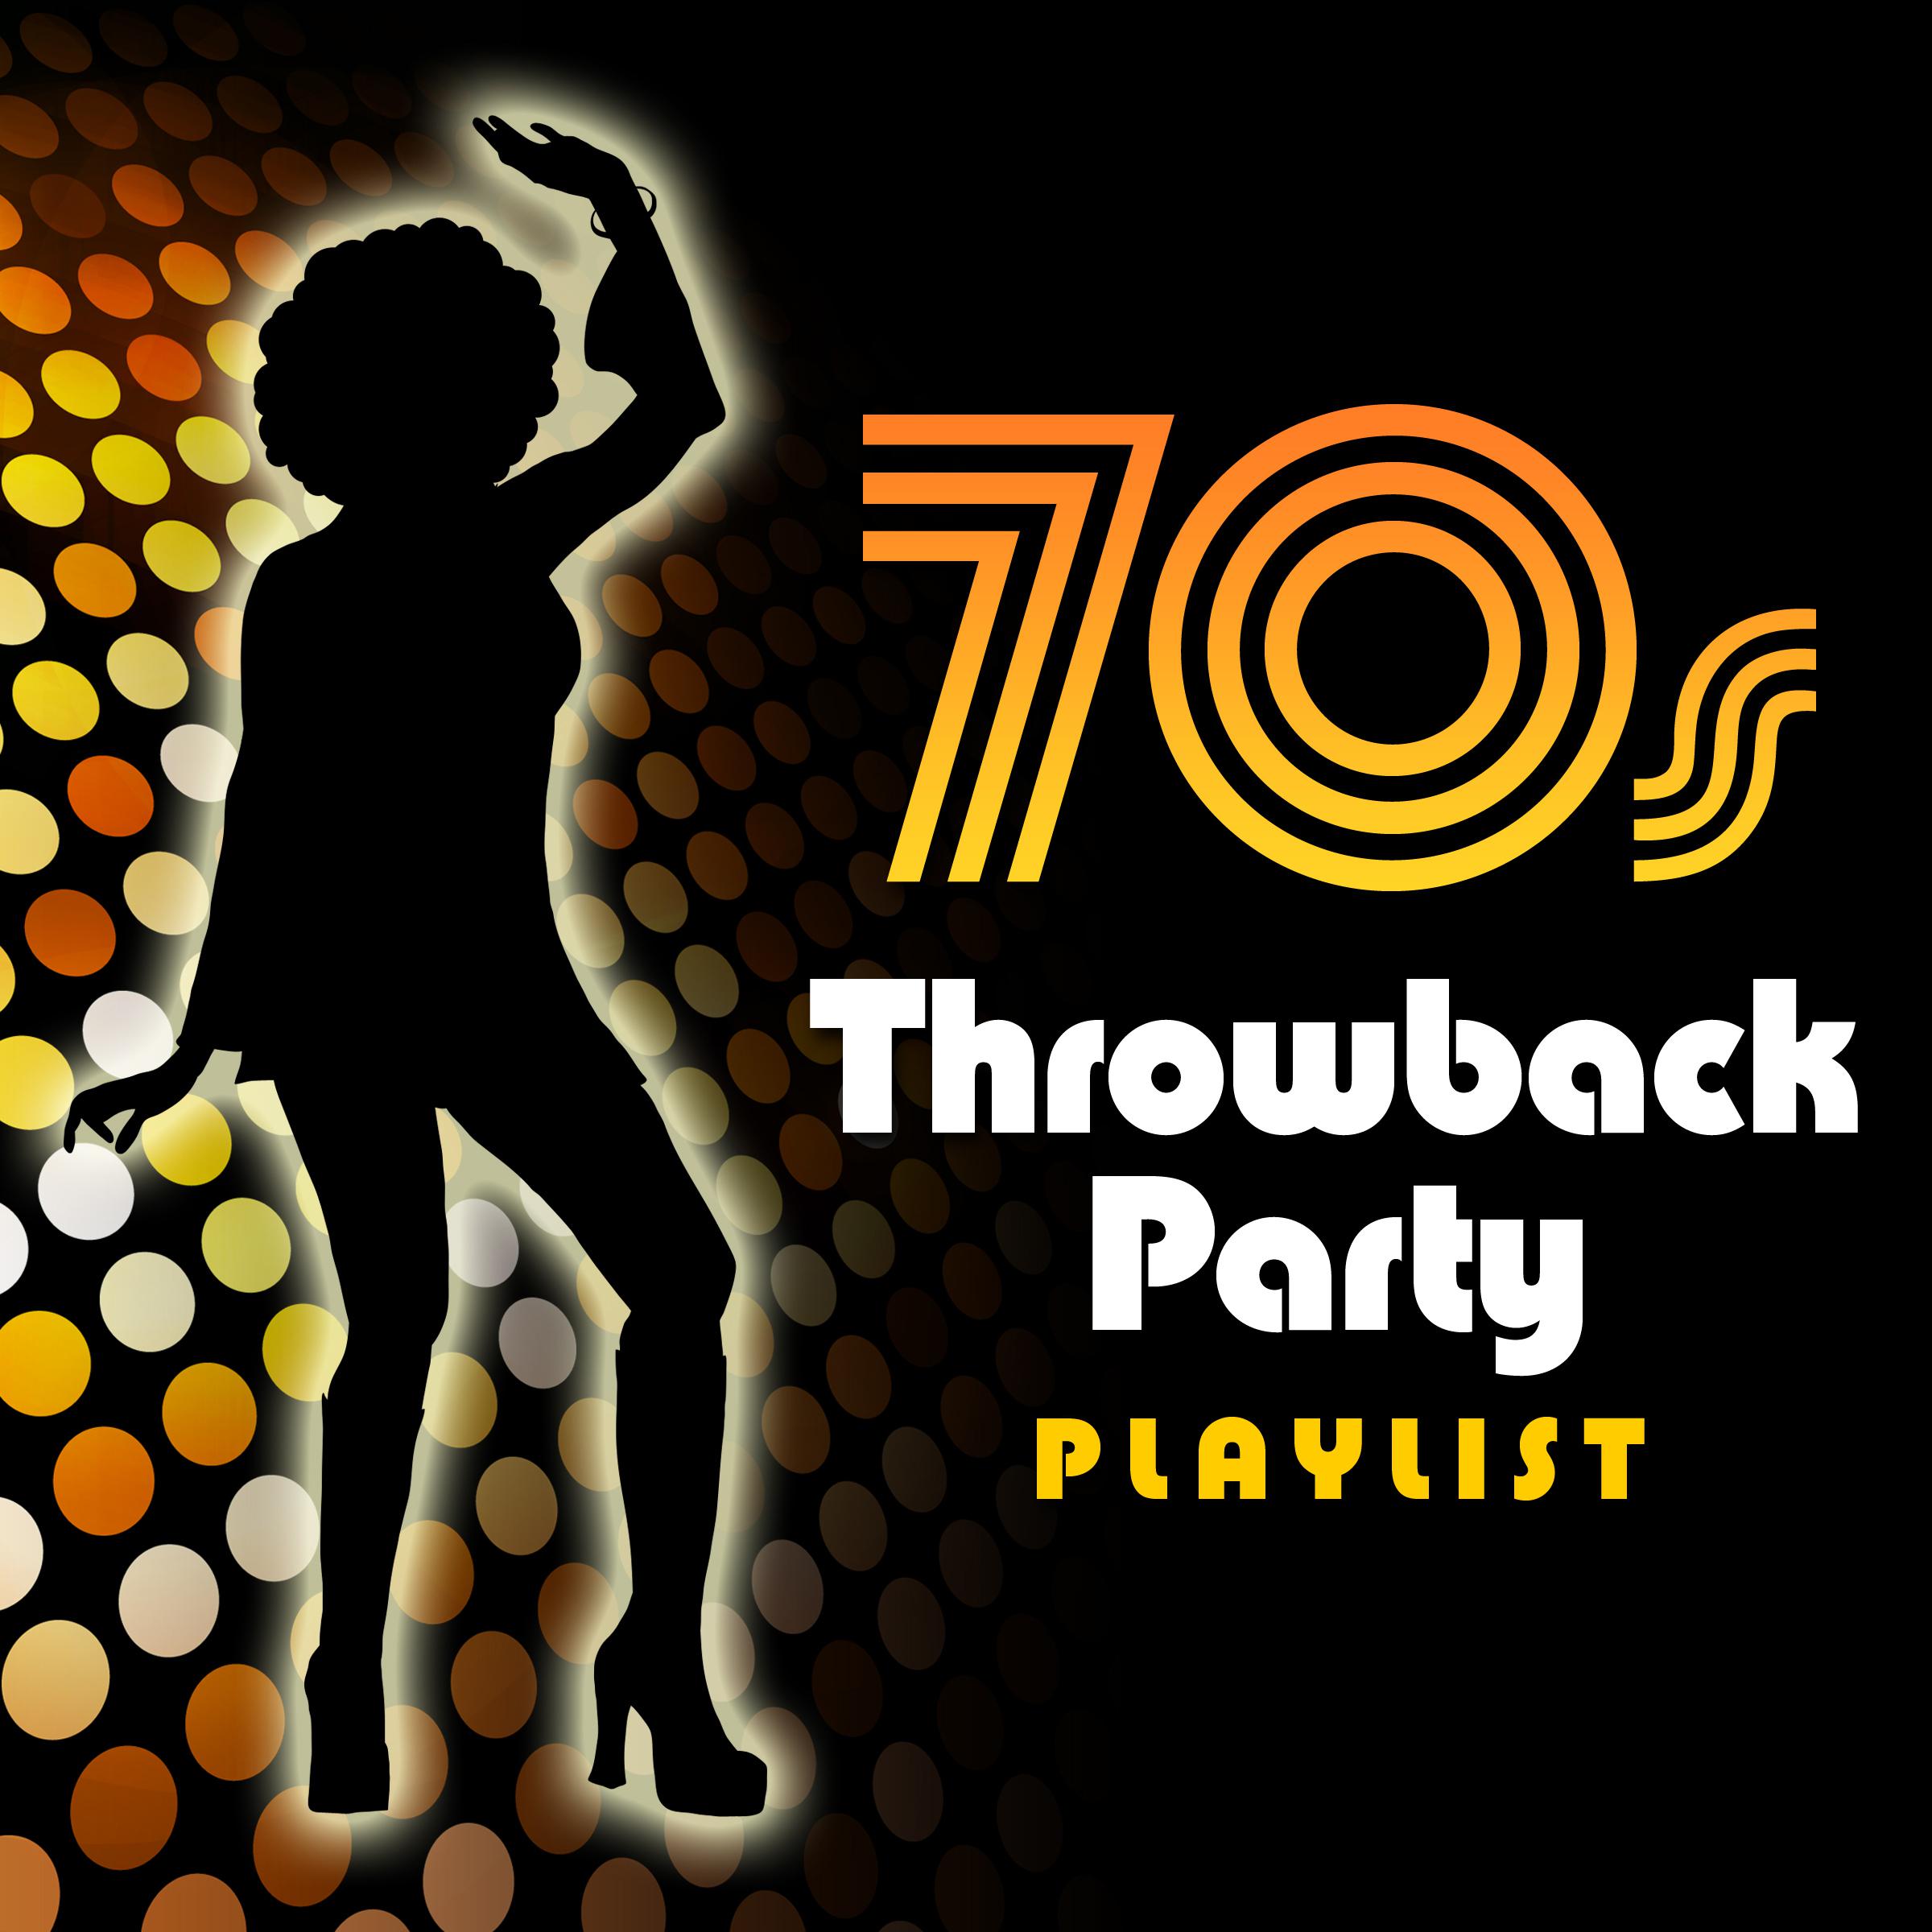 70s Throwback Party Playlist